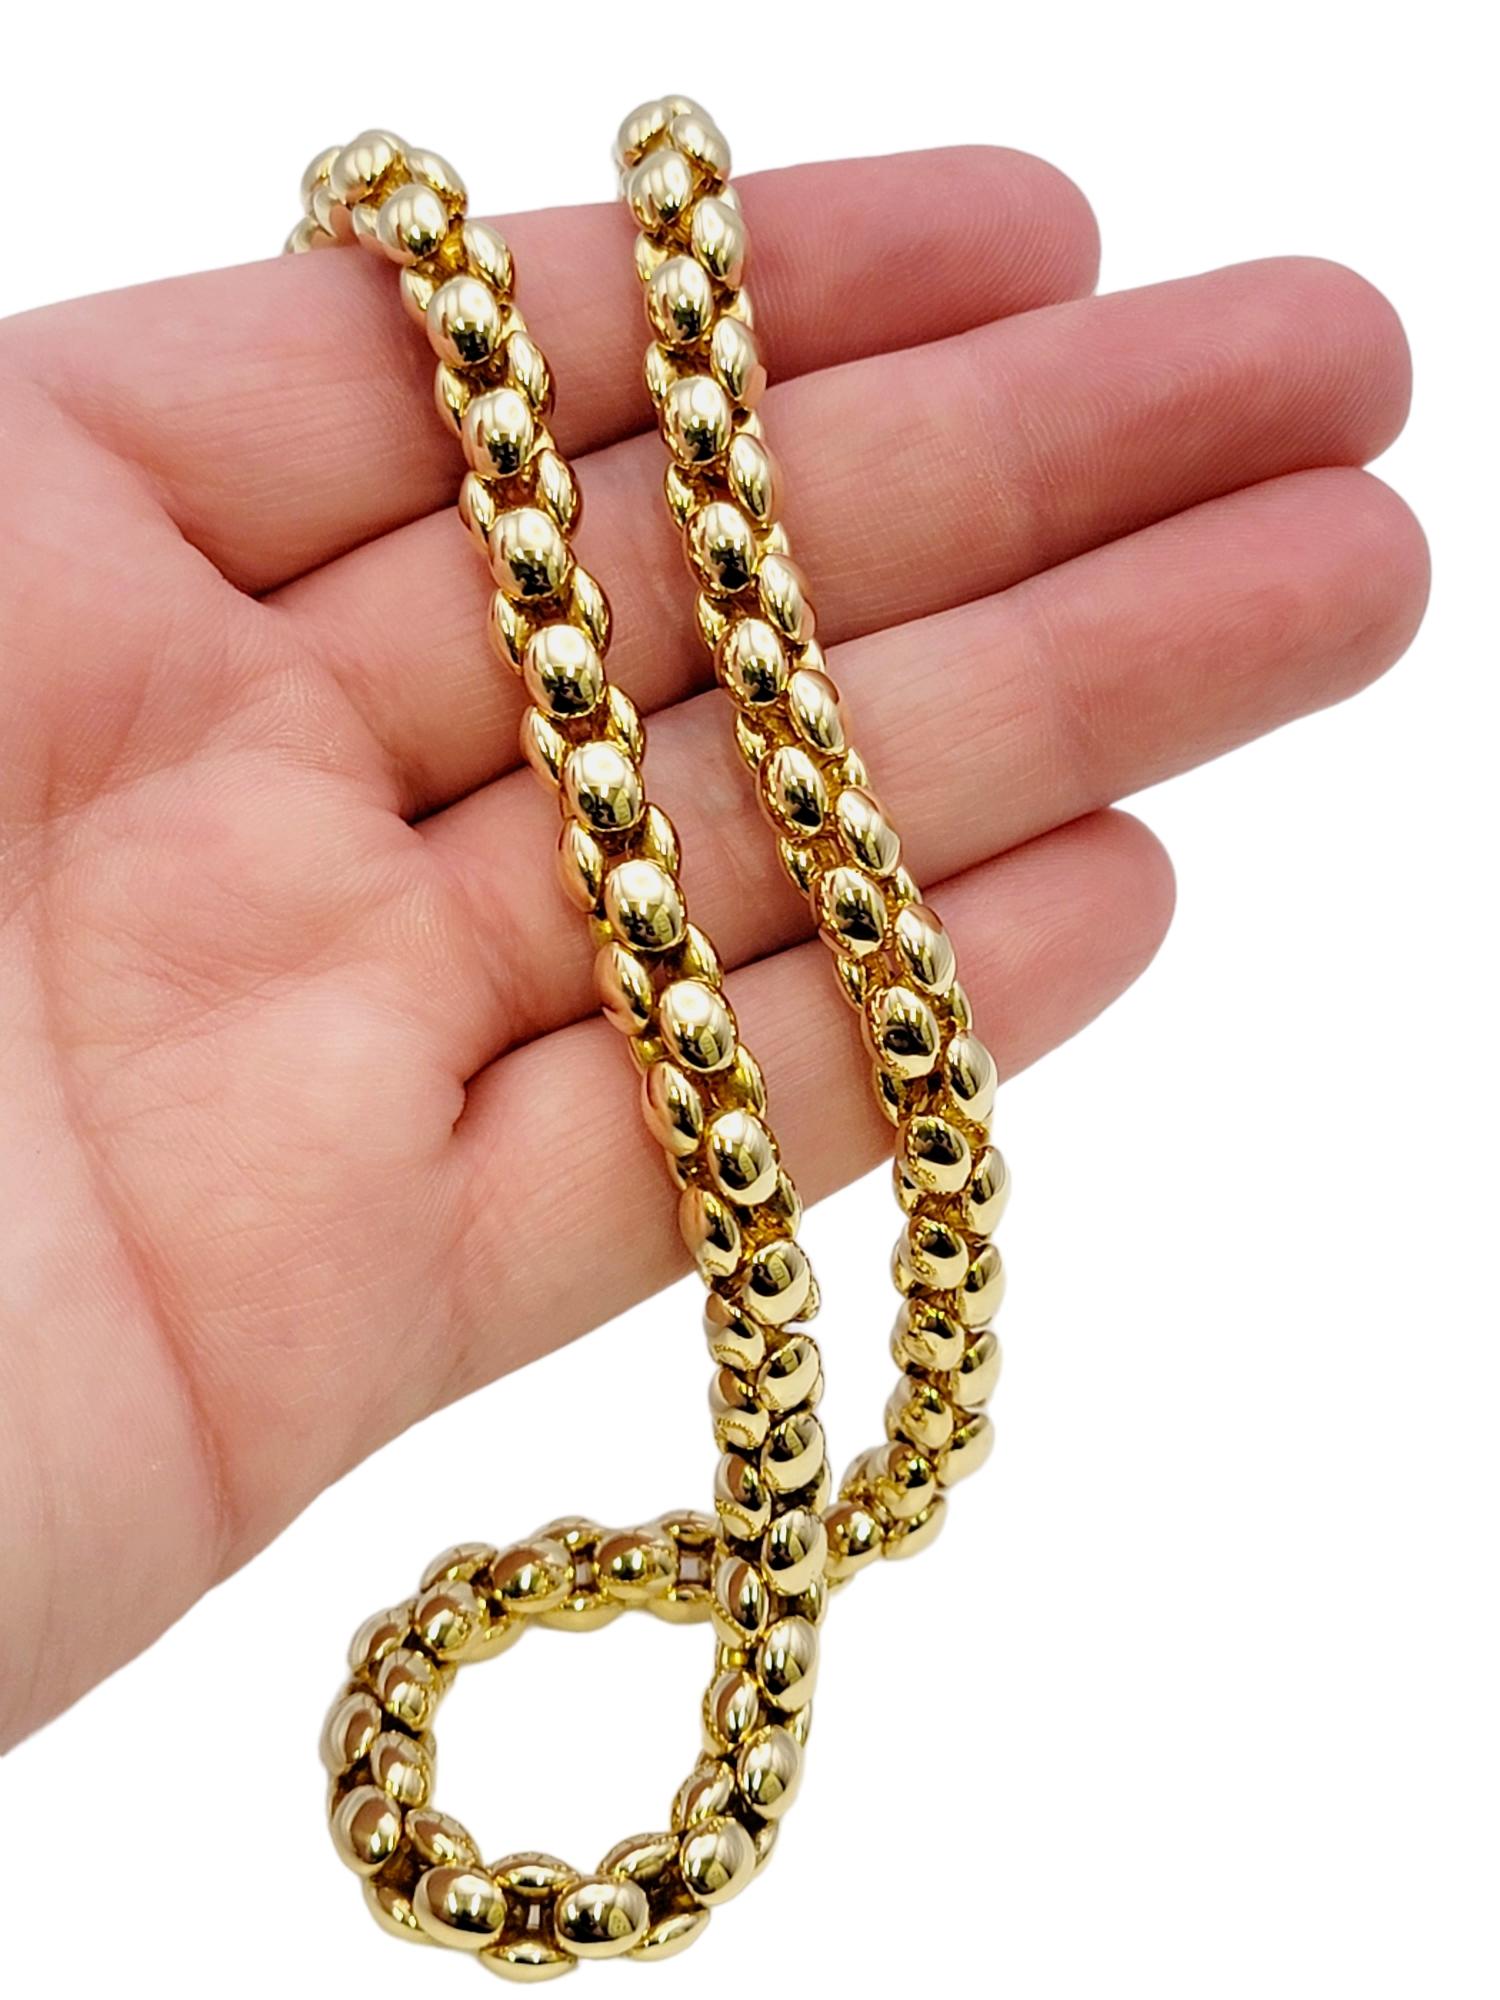 Chiampsean Polished 18 Karat Yellow Gold Chunky Popcorn Chain Necklace For Sale 7